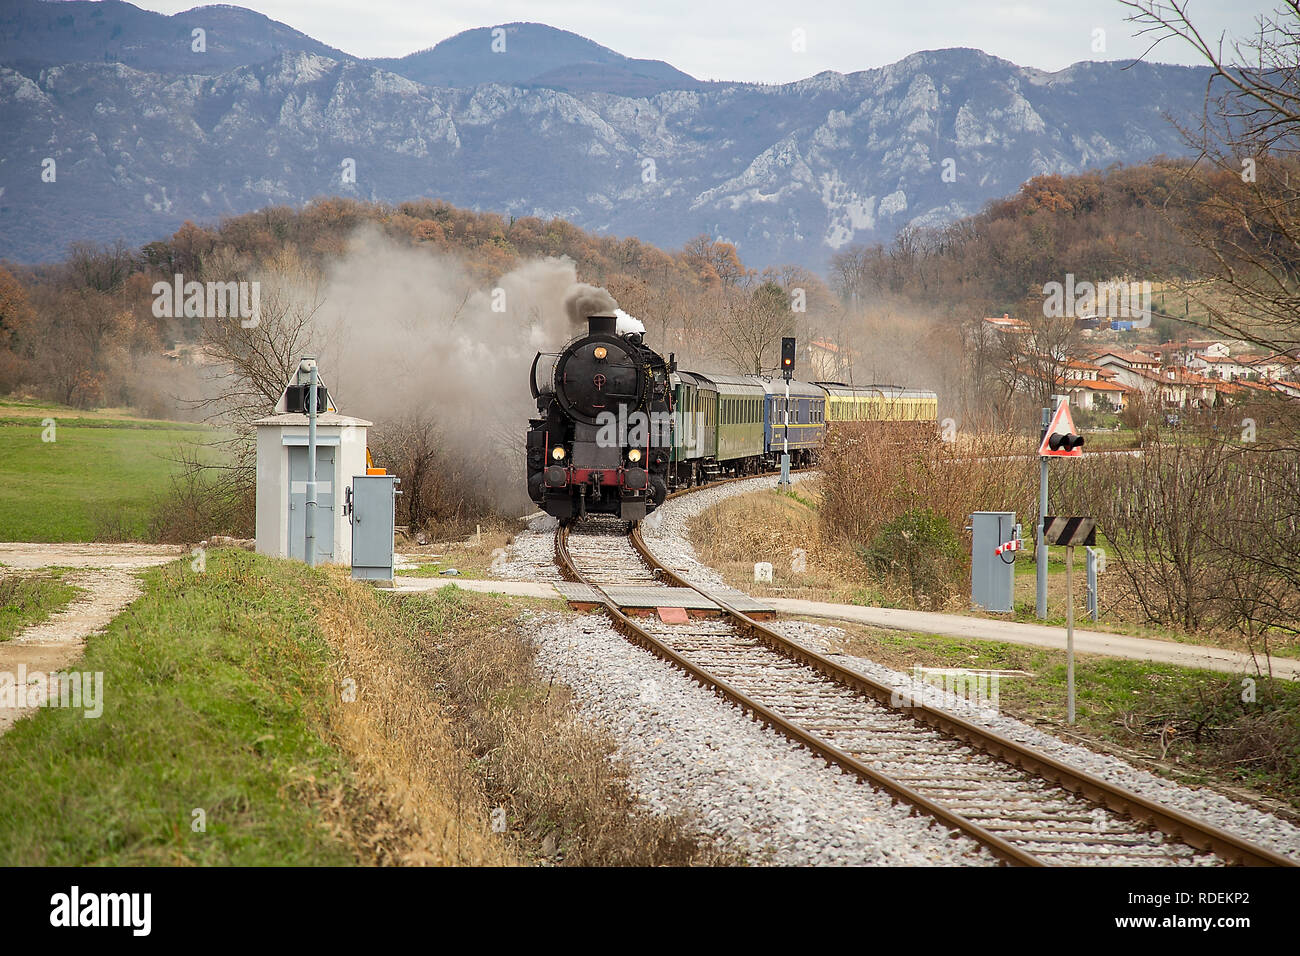 Old steam train leaving the railway station at Ajdovščina, Slovenia, Europe. Lots of black and gray steam hiding the locomotive, full frame Stock Photo